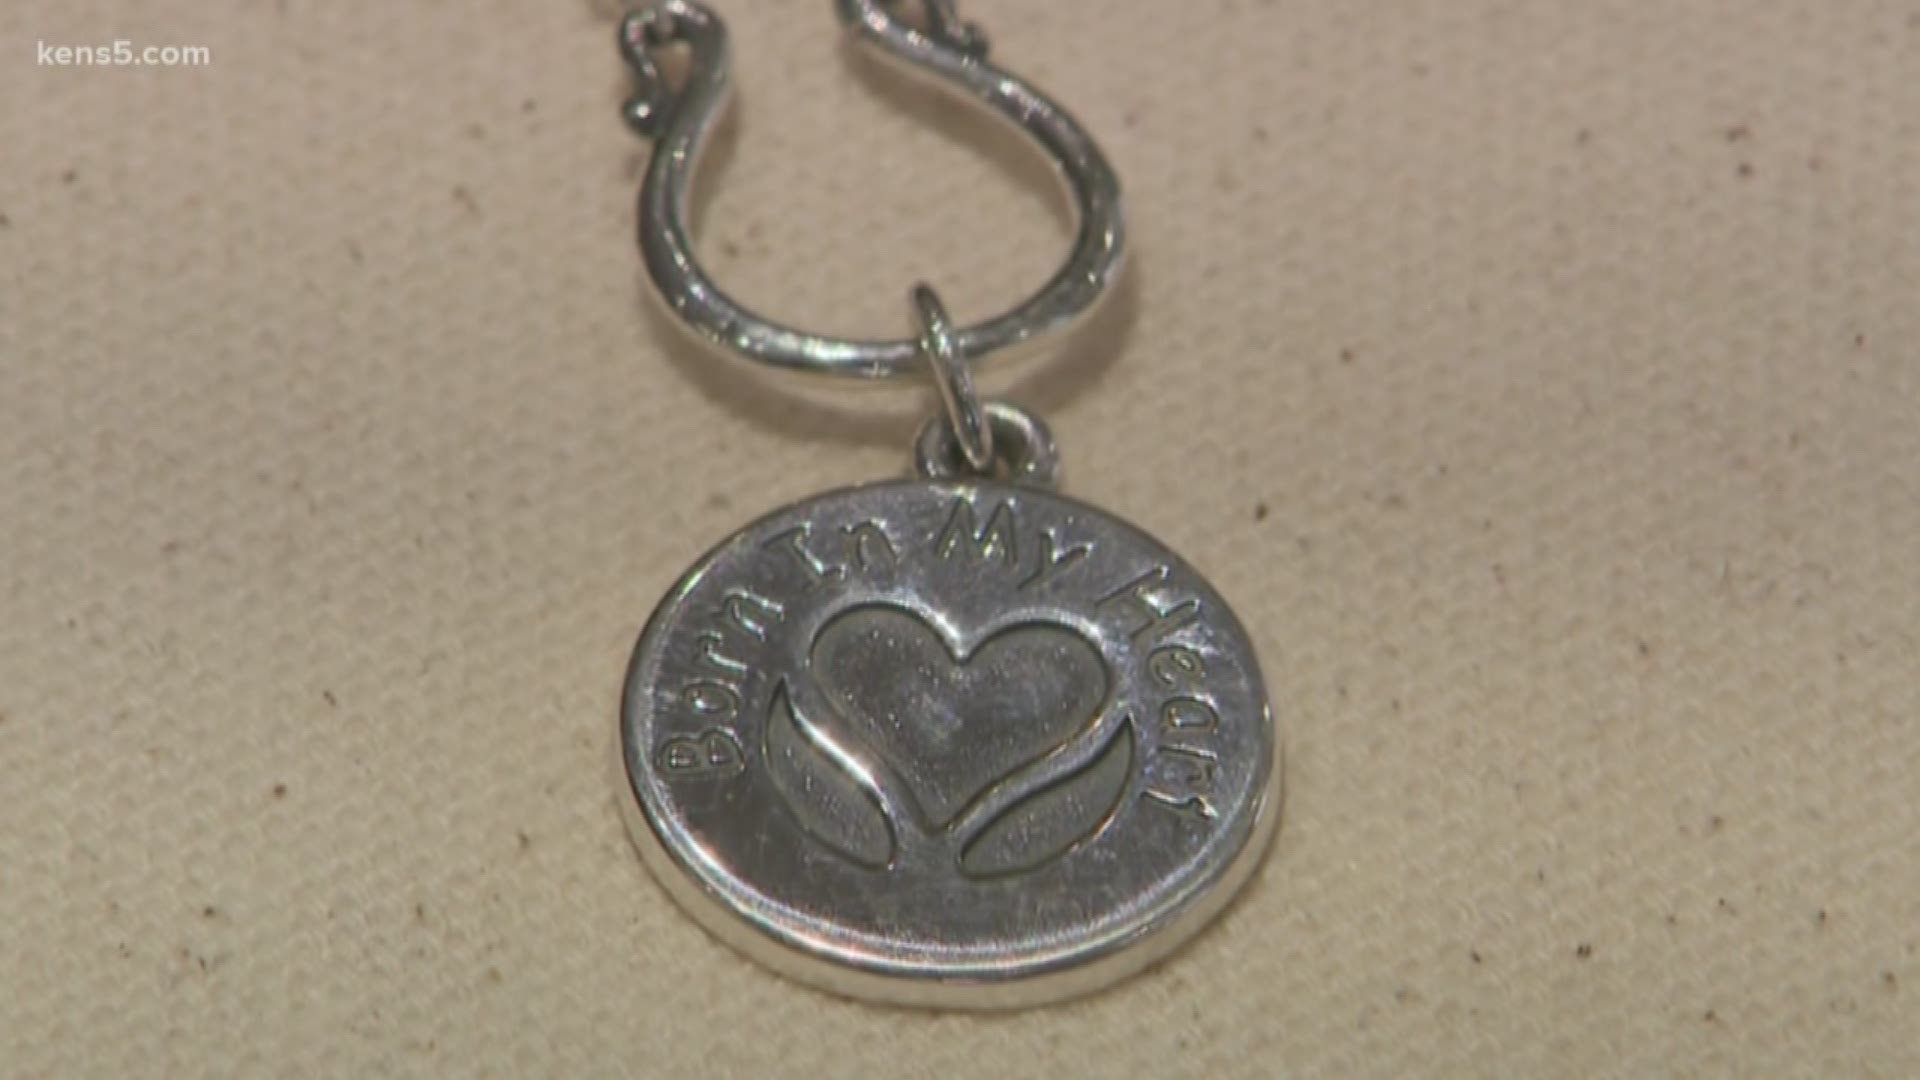 At James Avery stores, a special charm for sale commemorates families who undergo the adoption process.